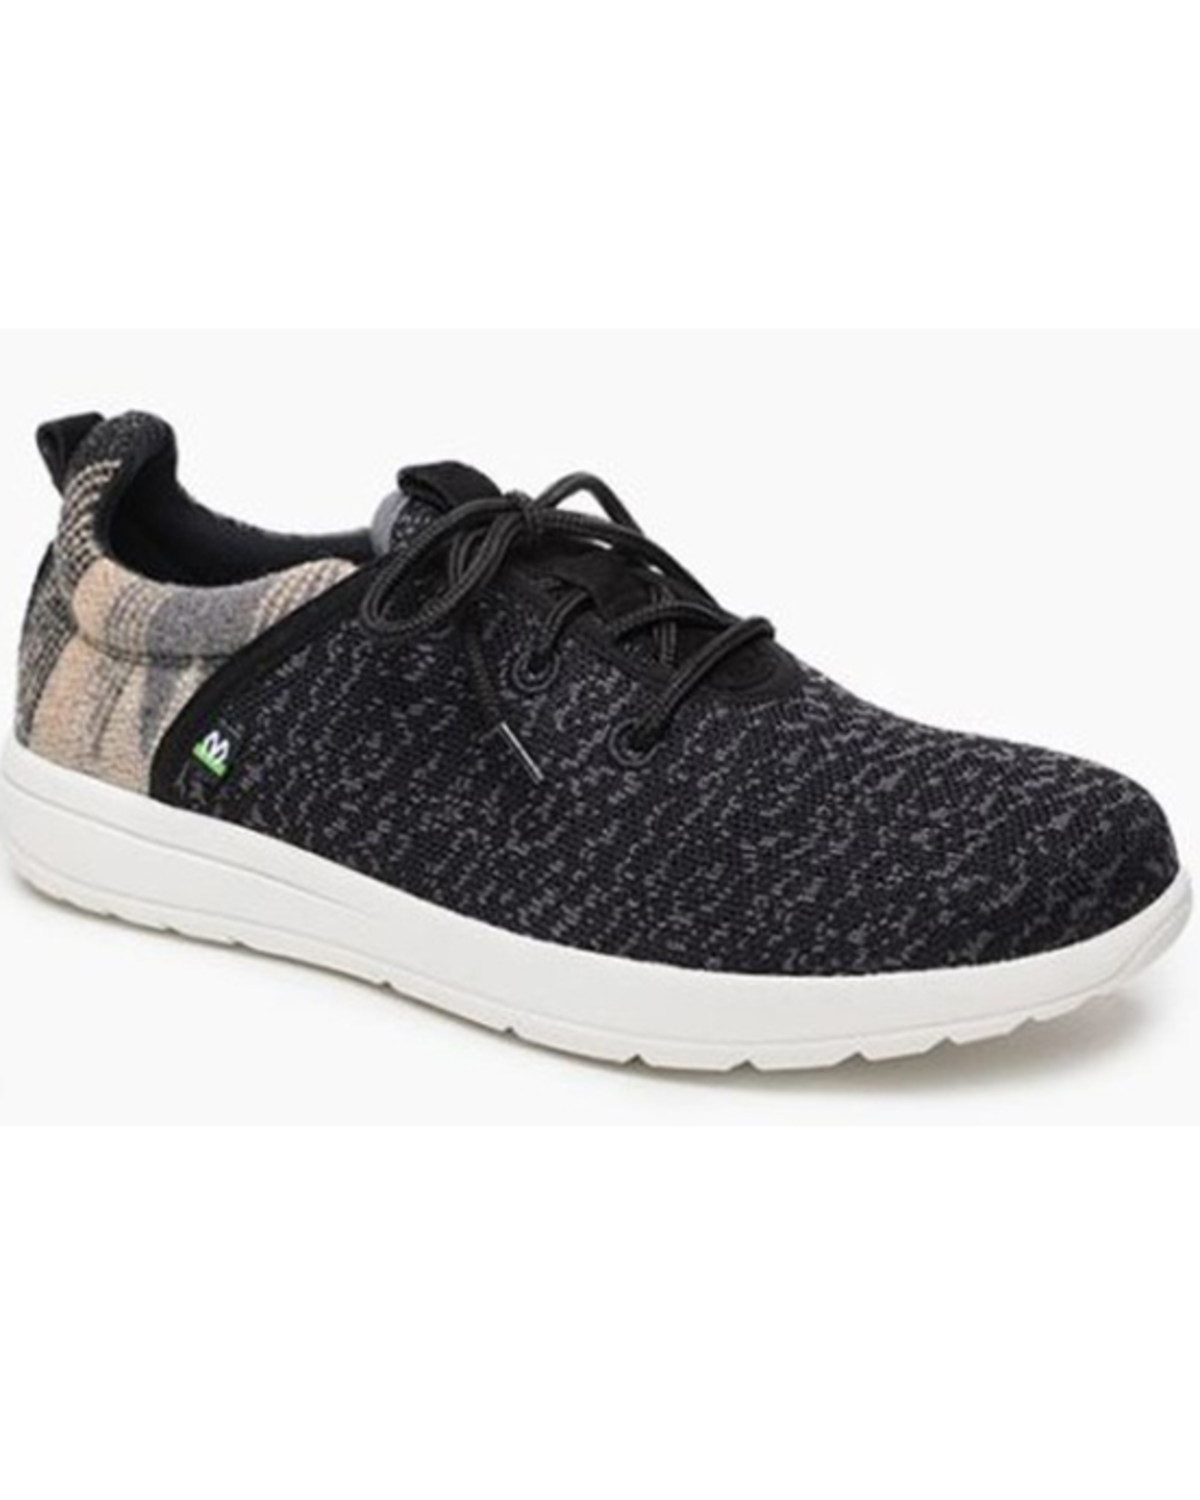 Minnetonka Men's Recycled Eco Anew Sneakers